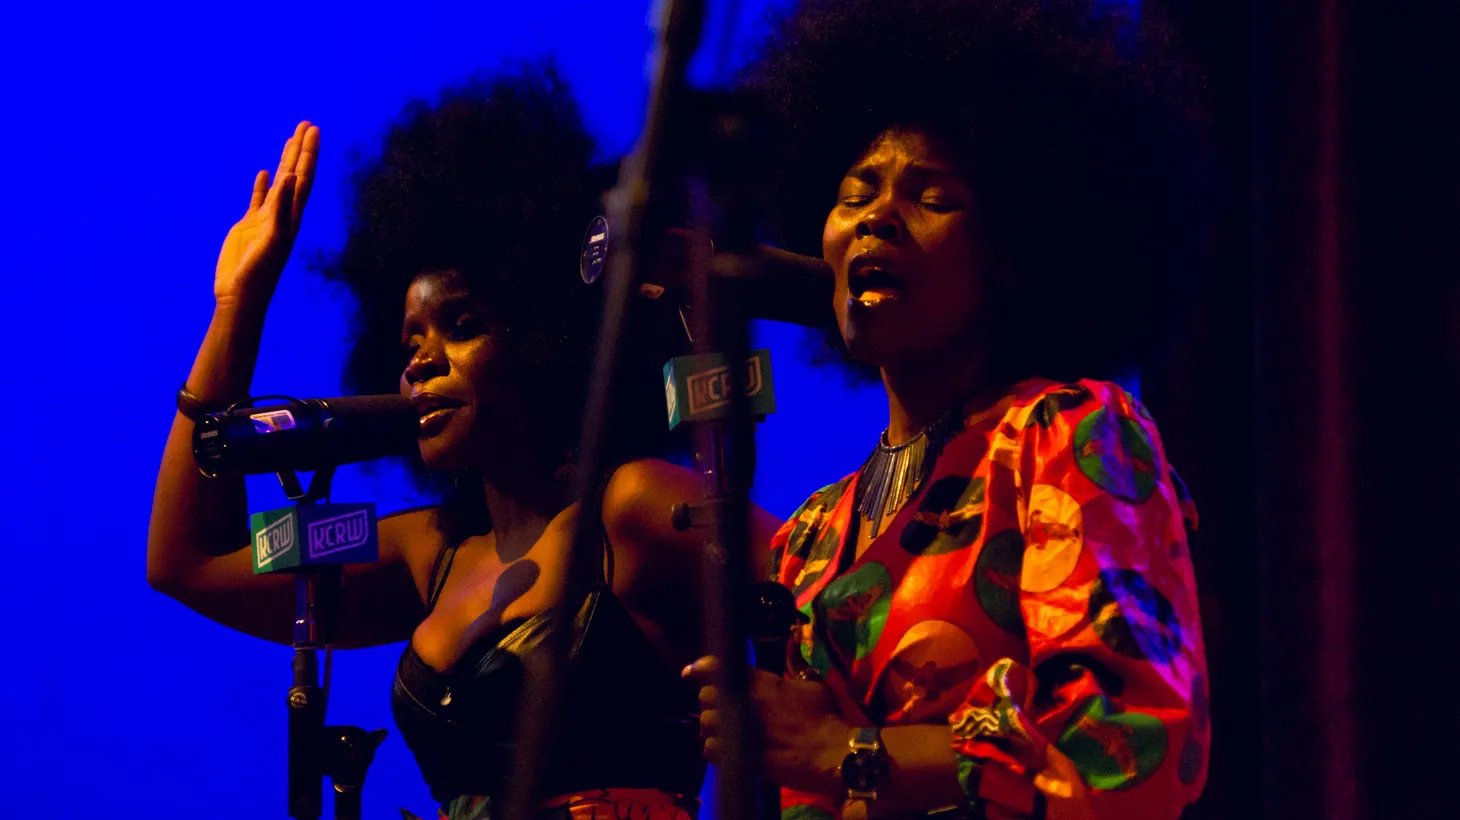 Theresa Ng'Ambi, and Hanna Tembo have us orbiting the stratosphere with their vocal additions to the WITCH experience.